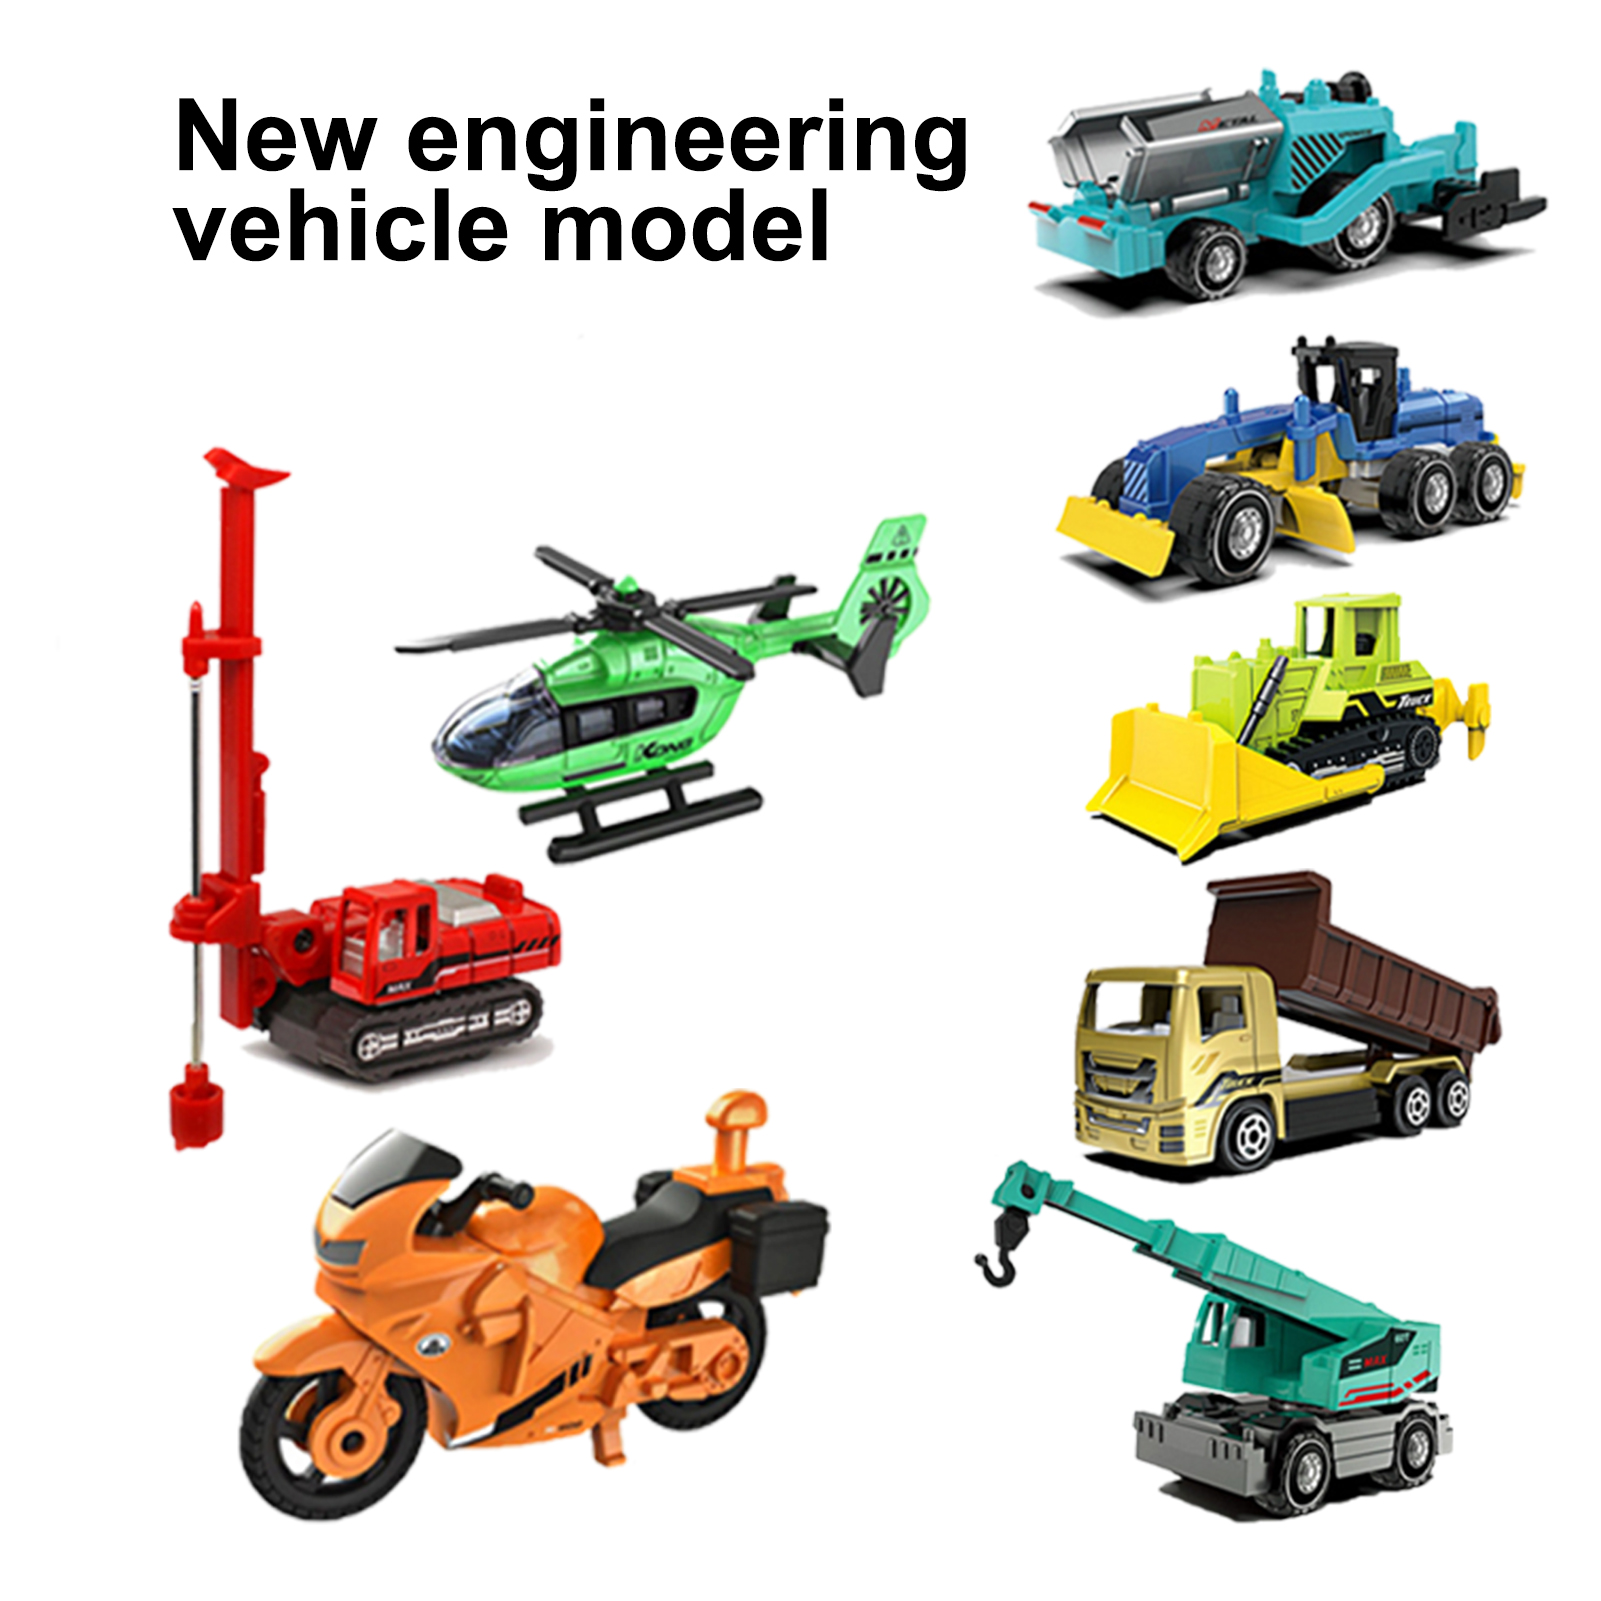 Pnellth 4Pcs/Set Engineering Trunk Toys Simulation Cranes Forklift Cargo Truck Diecast Alloy Vehicle Toy 1:64 Scale Engineering Vehicle Aircraft Motorcycle Models Set Christmas Gift - image 2 of 7